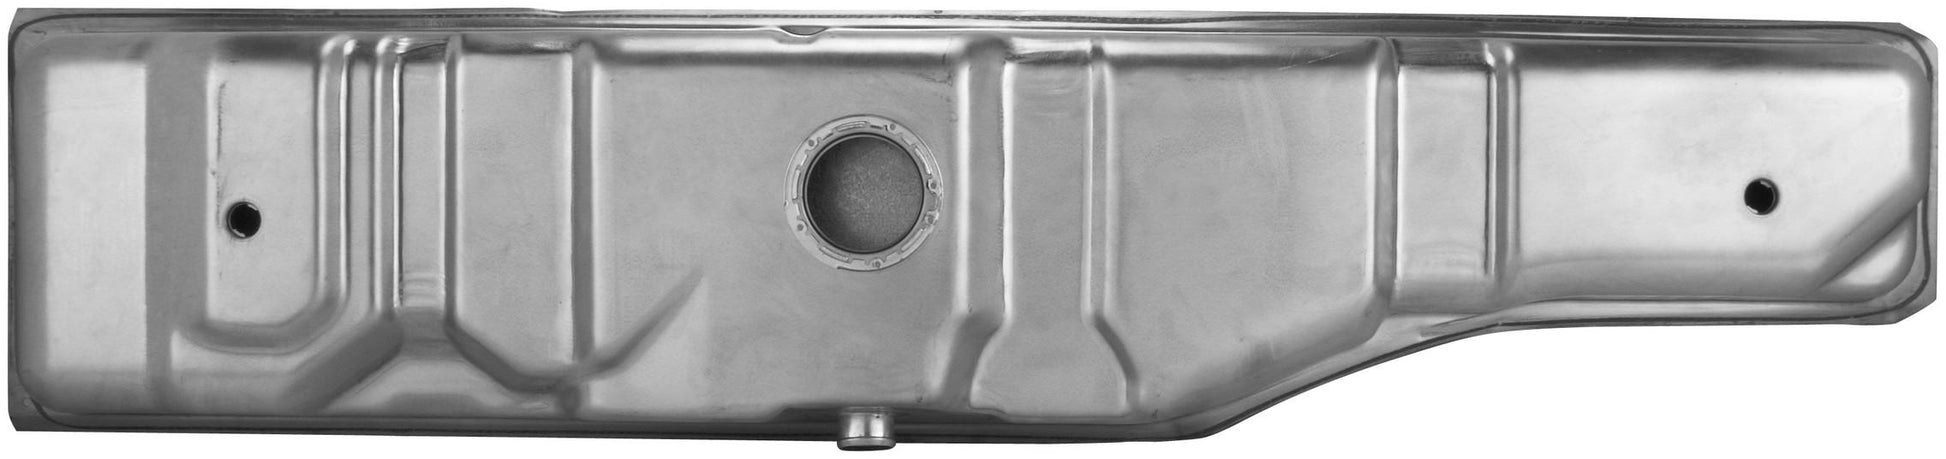 Top View of Fuel Tank SPECTRA GM58A